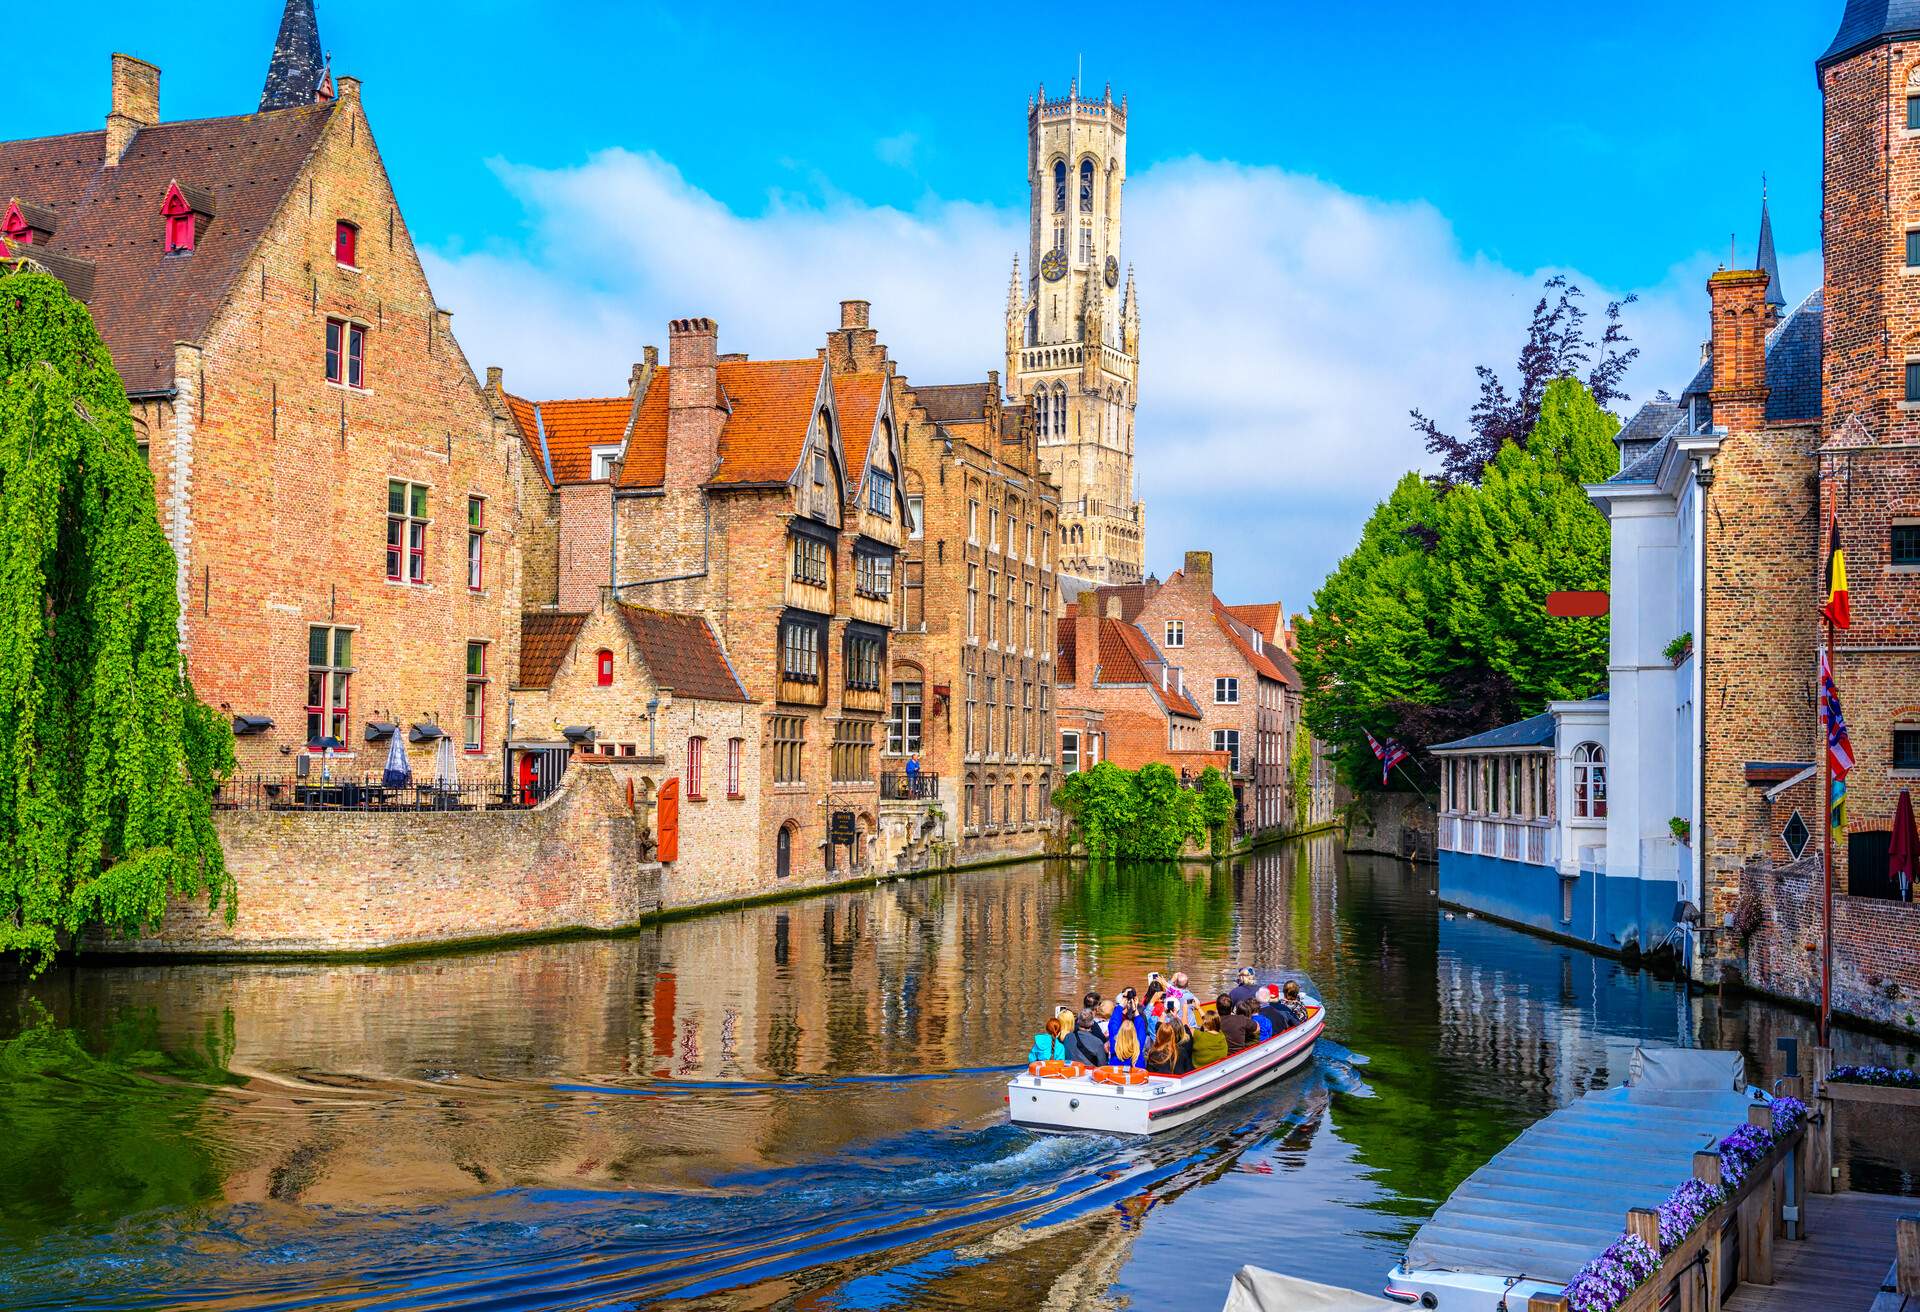 Classic view of the historic city center with canal in Brugge (Bruges), West Flanders province, Belgium. Cityscape of Bruges.; Shutterstock ID 1421308190